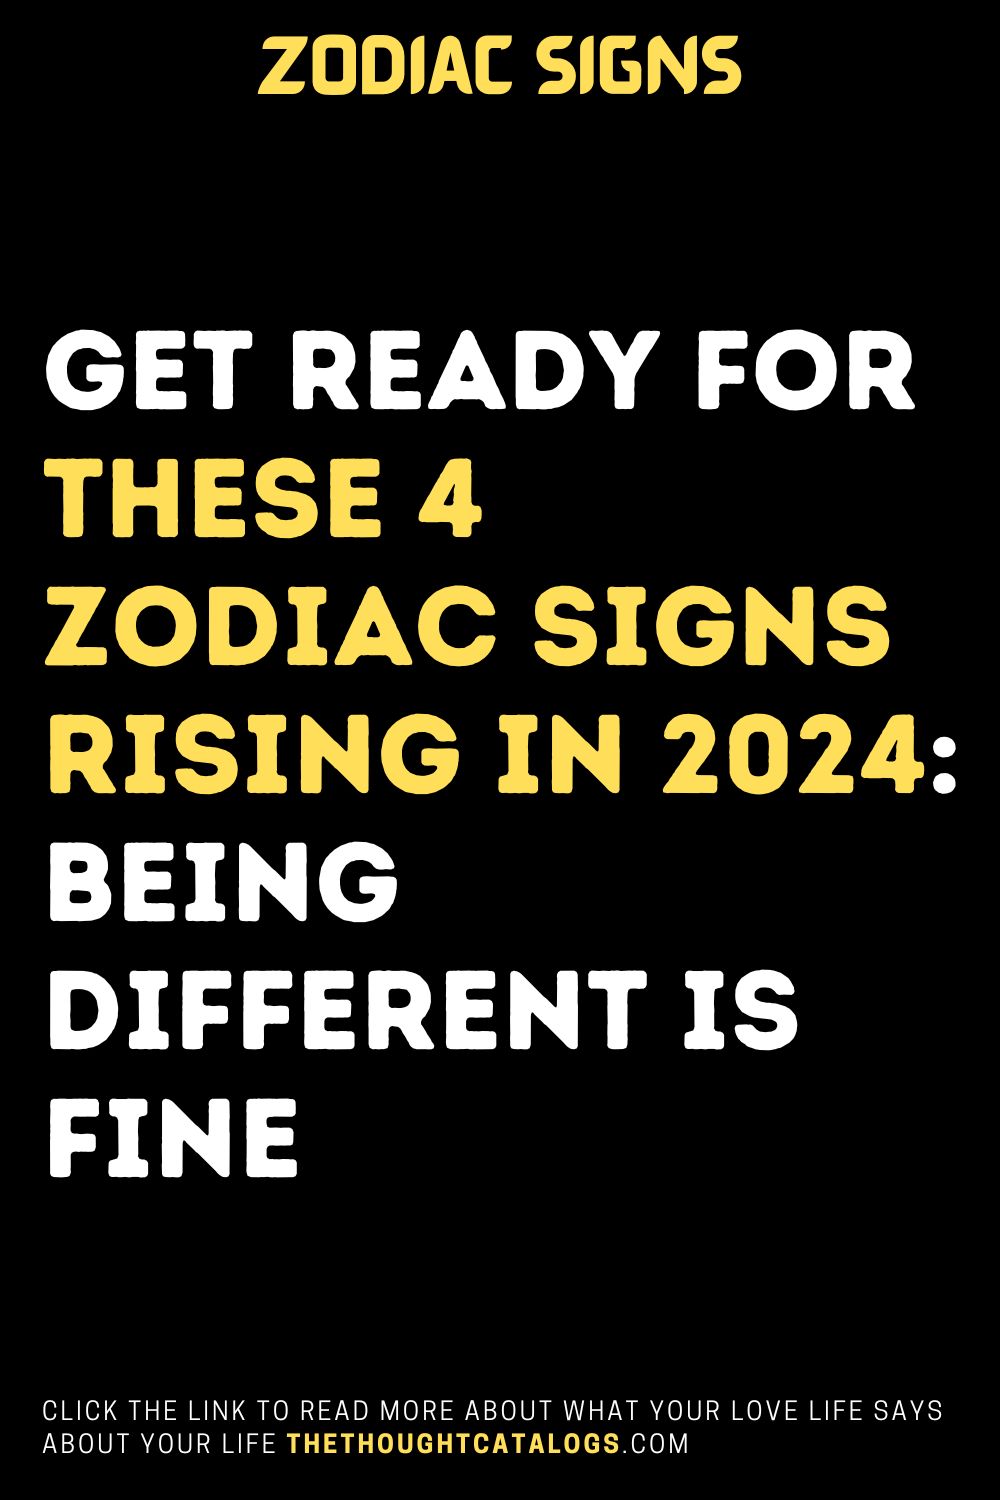 Get Ready For These 4 Zodiac Signs Rising In 2024: Being Different Is Fine